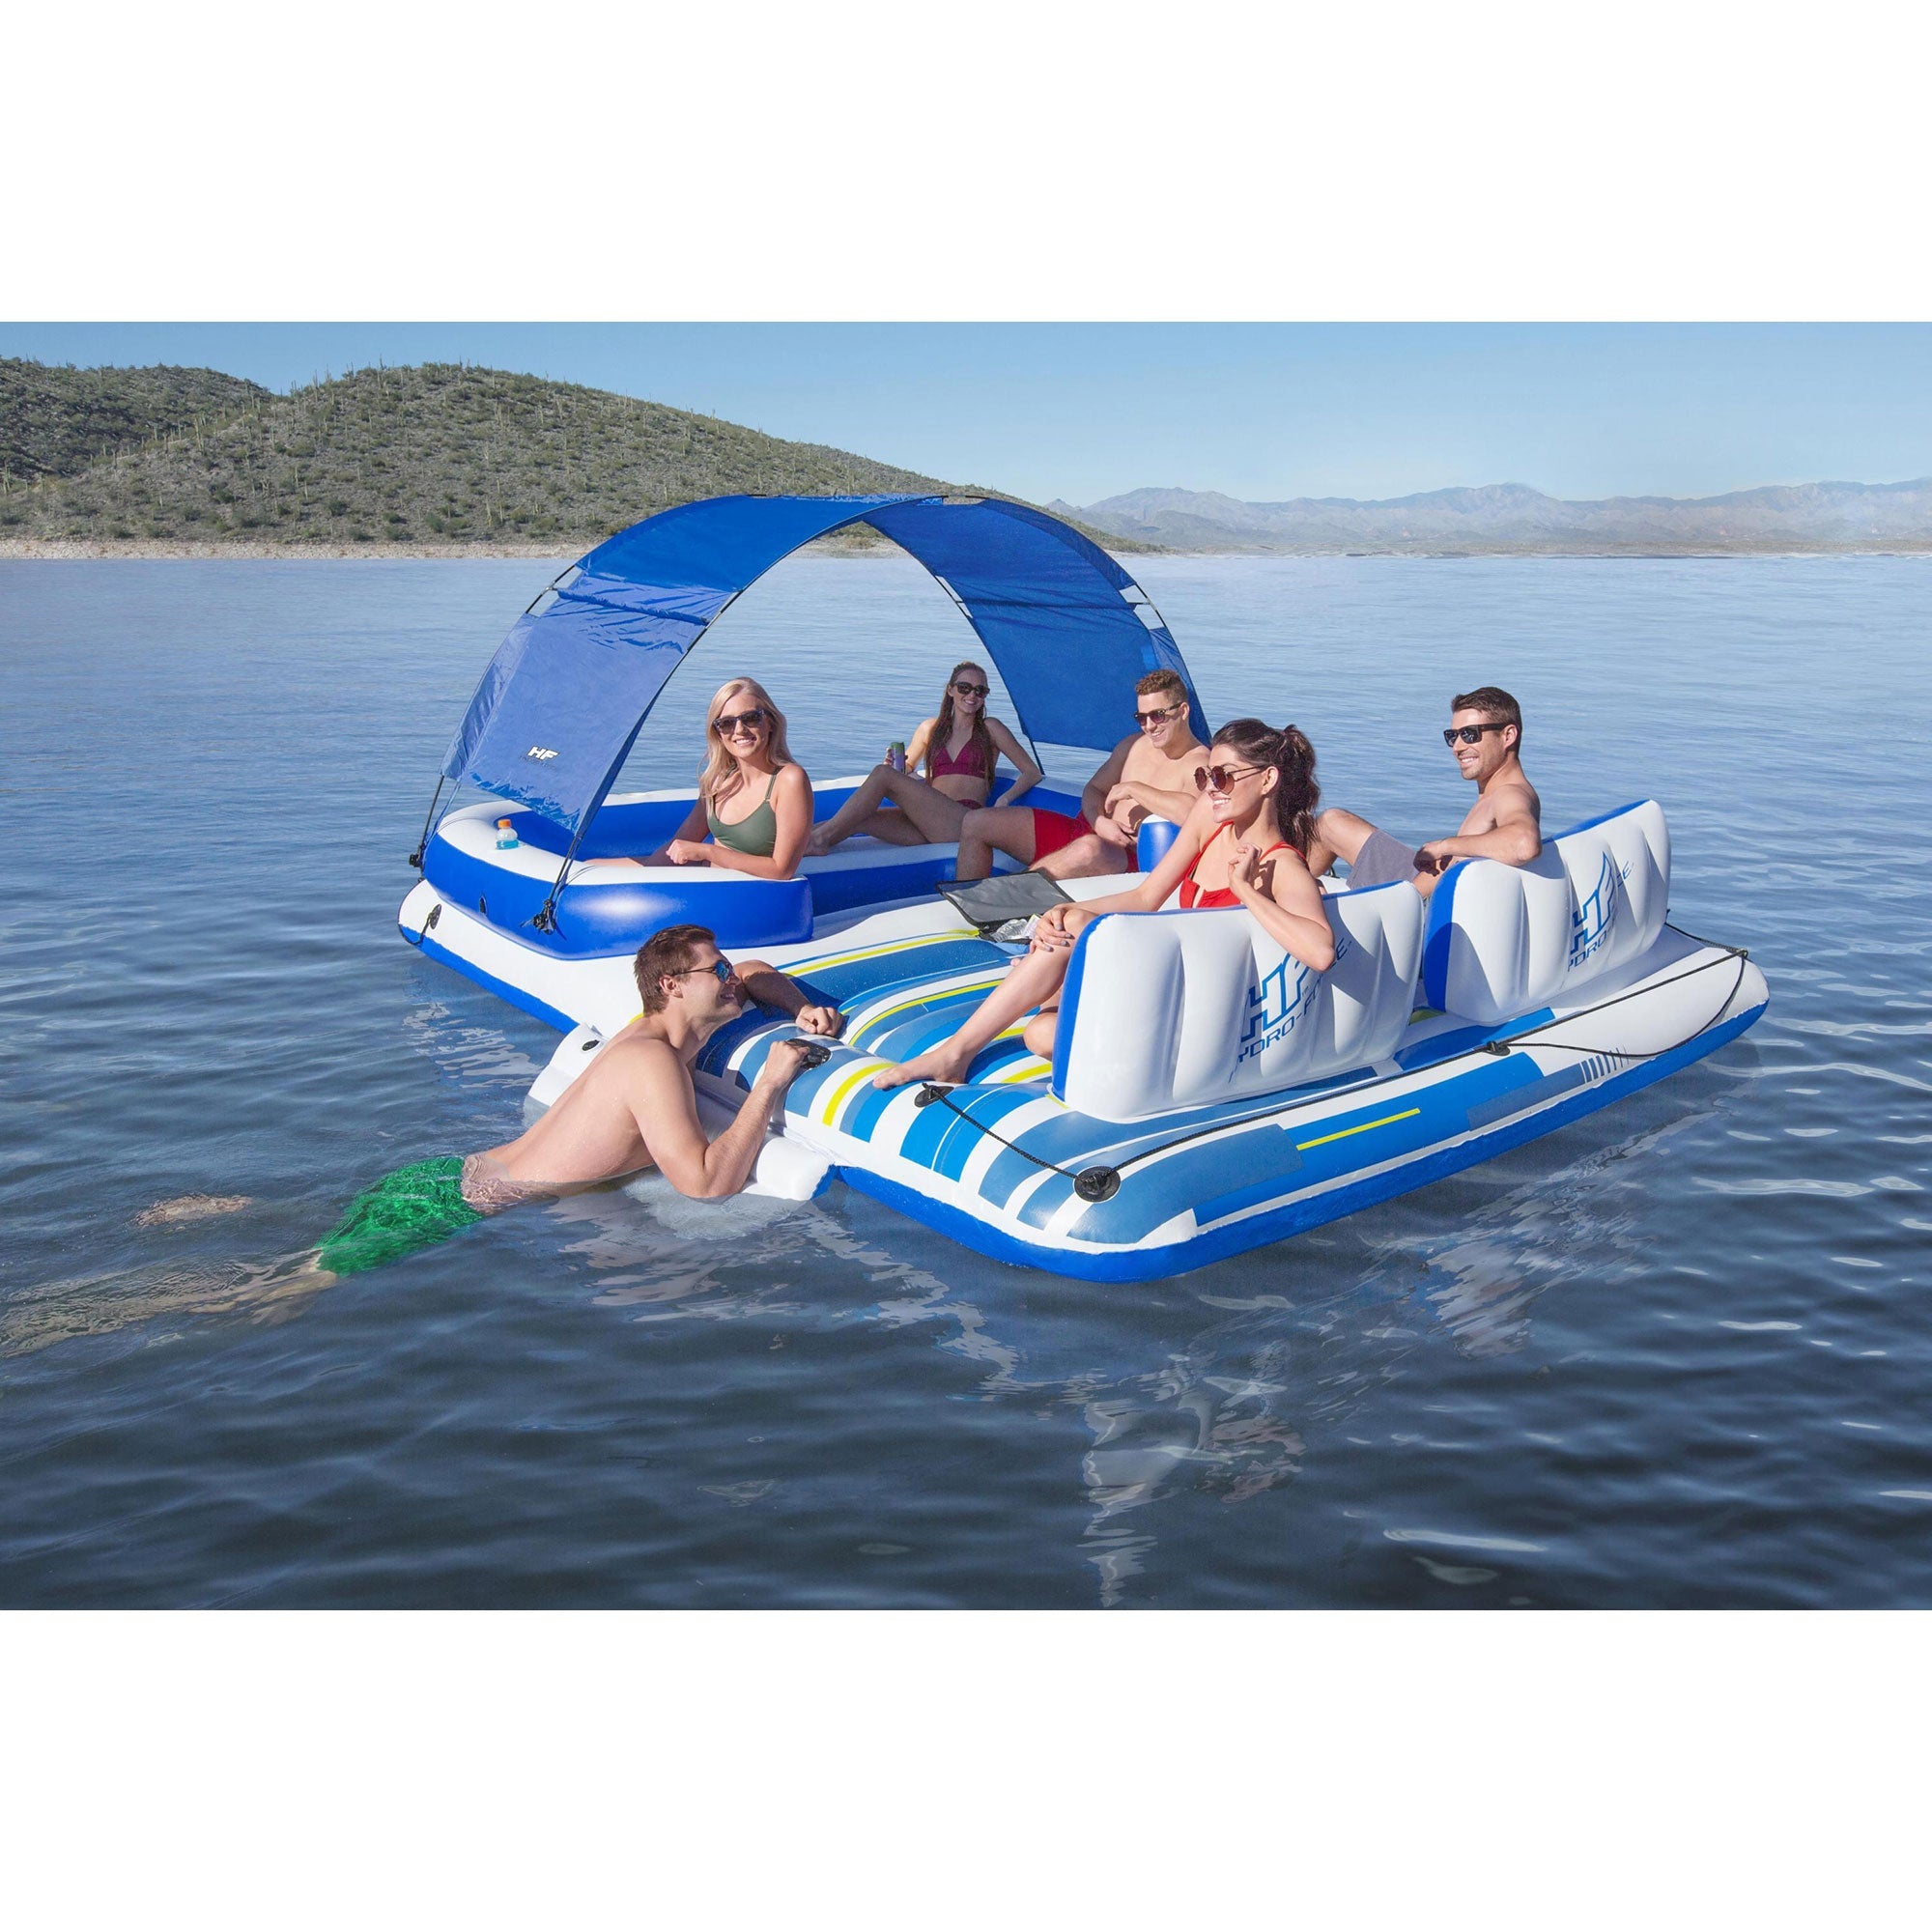 Bestway-Hydro-Force-Tropical-Breeze-6-Person-Inflatable-Party-Island-Water-Float-Pool-Floats-&-Loungers